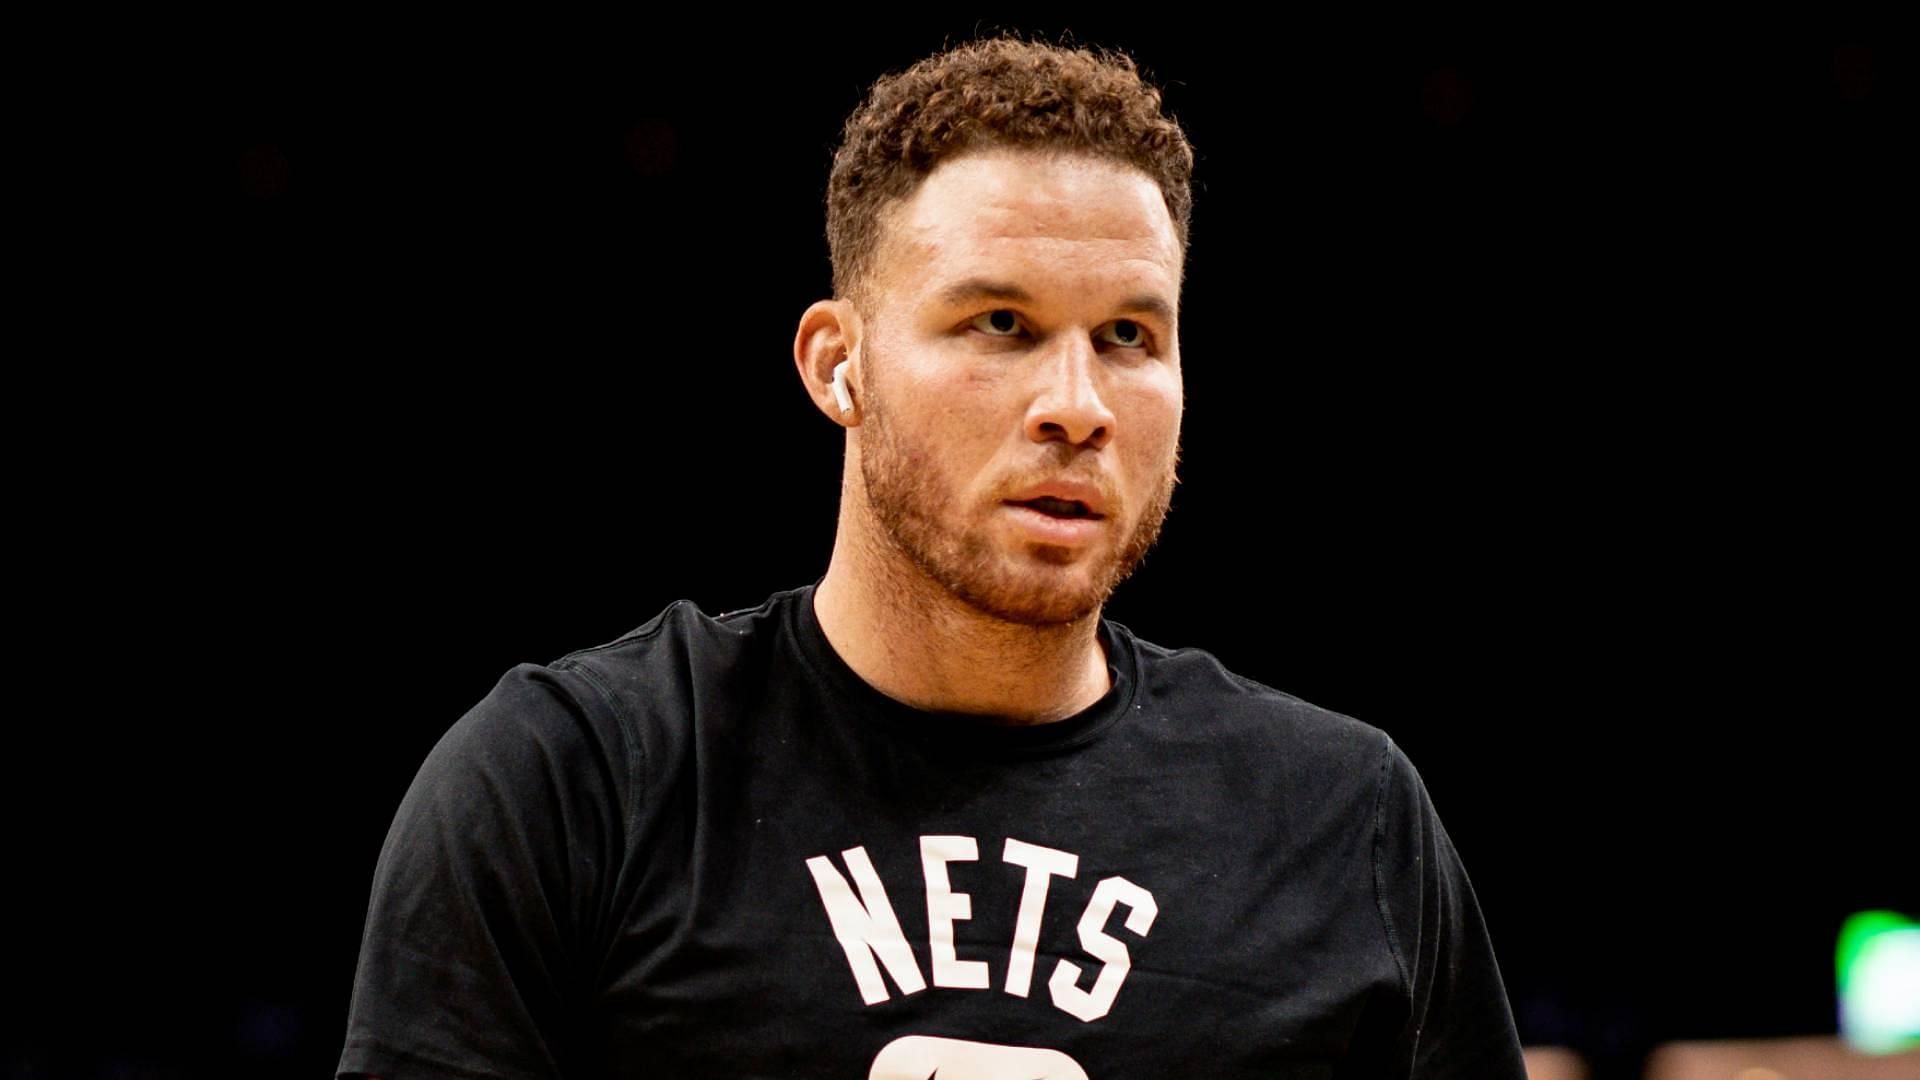 Blake Griffin will be playing for another NBA team next season. [Photo: Sporting News]